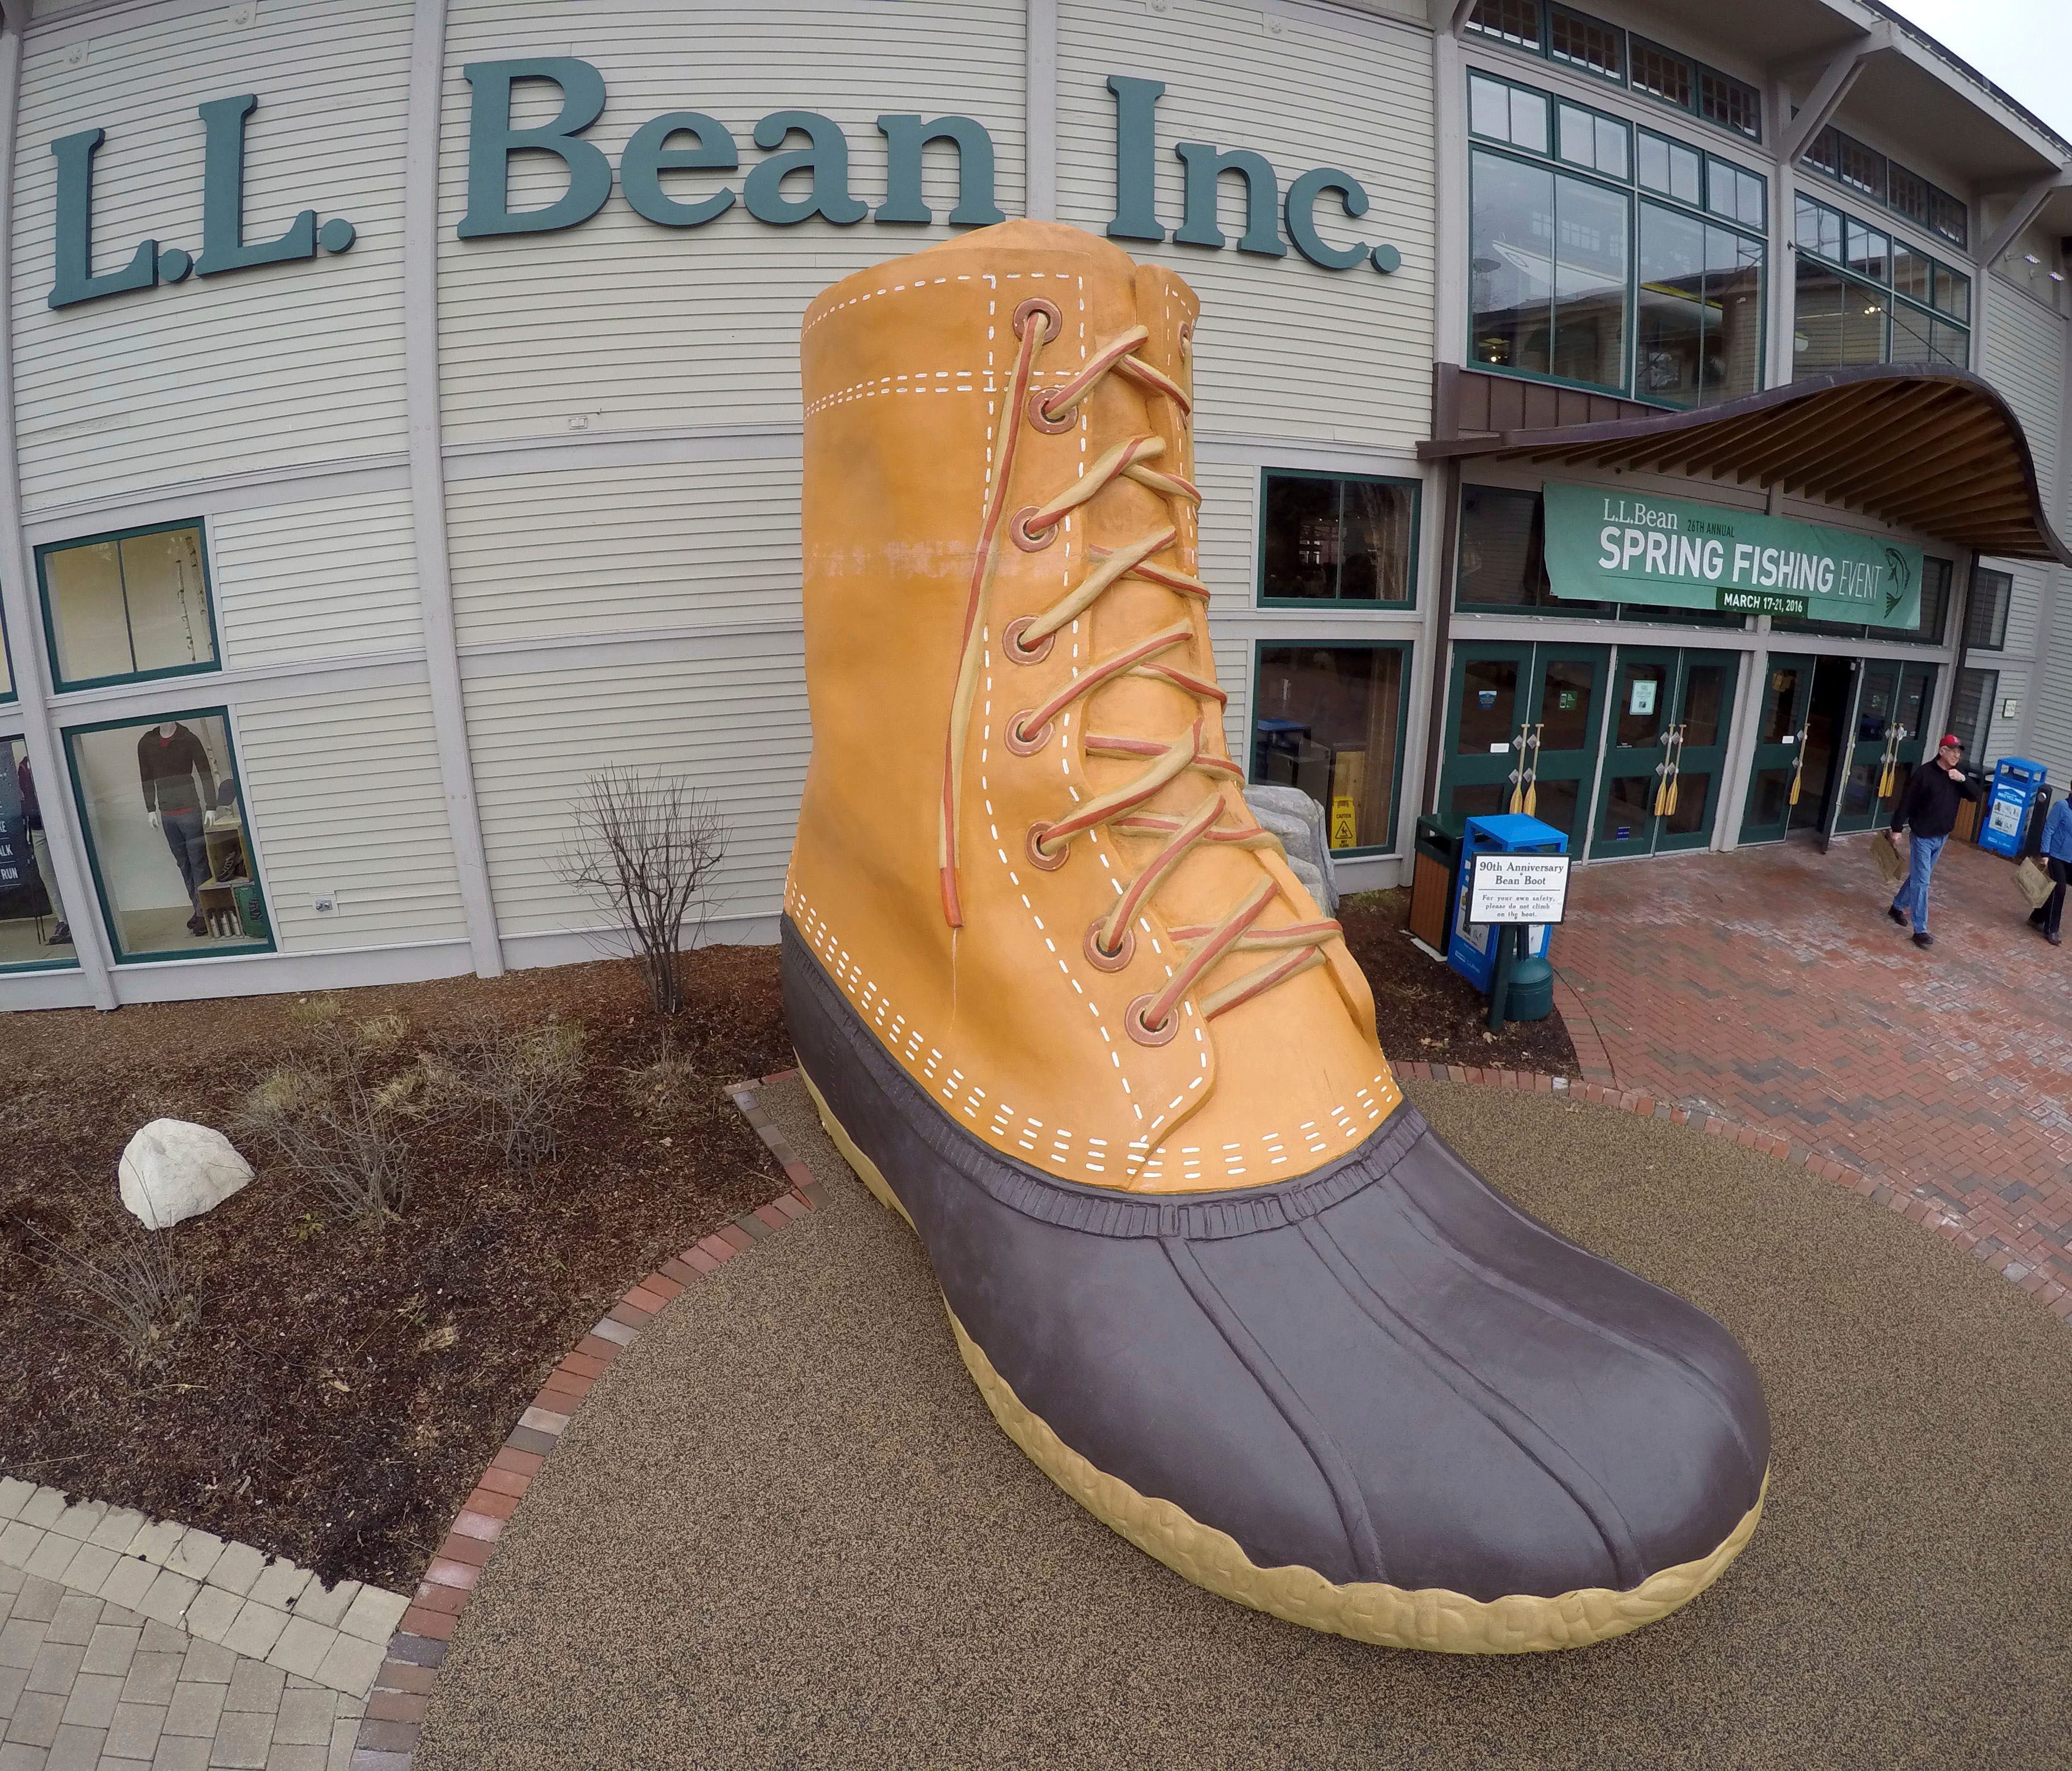 FILE - In this March 16, 2016, file photo, shoppers exit the L.L. Bean retail store in Freeport, Maine.   L.L. Bean is tightening its generous return policy by imposing a one-year limit on most returns to reduce abuse and fraud. Executives say return